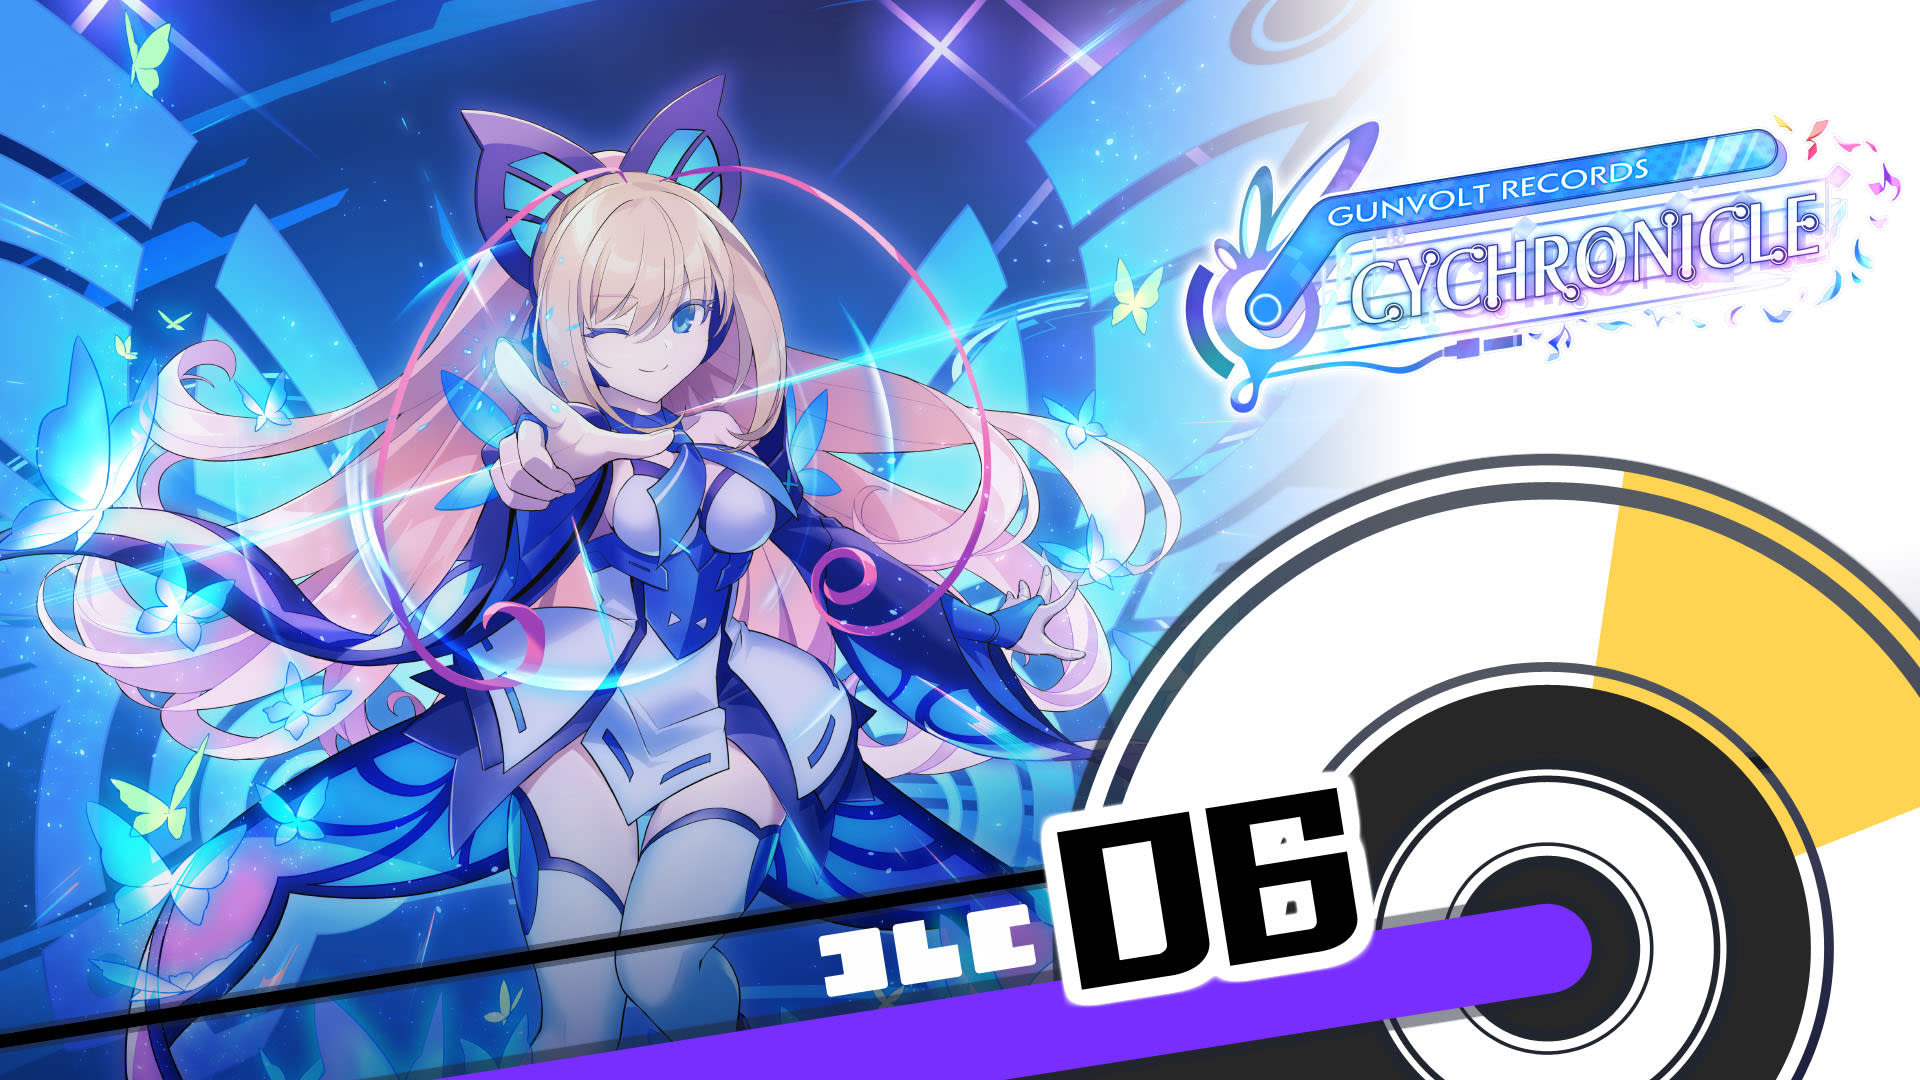 GUNVOLT RECORDS Cychronicle Song Pack 6 Lumen & Luxia: ♪Nebulous Clock ♪Iolite ♪Paradox Stage ♪Afsān